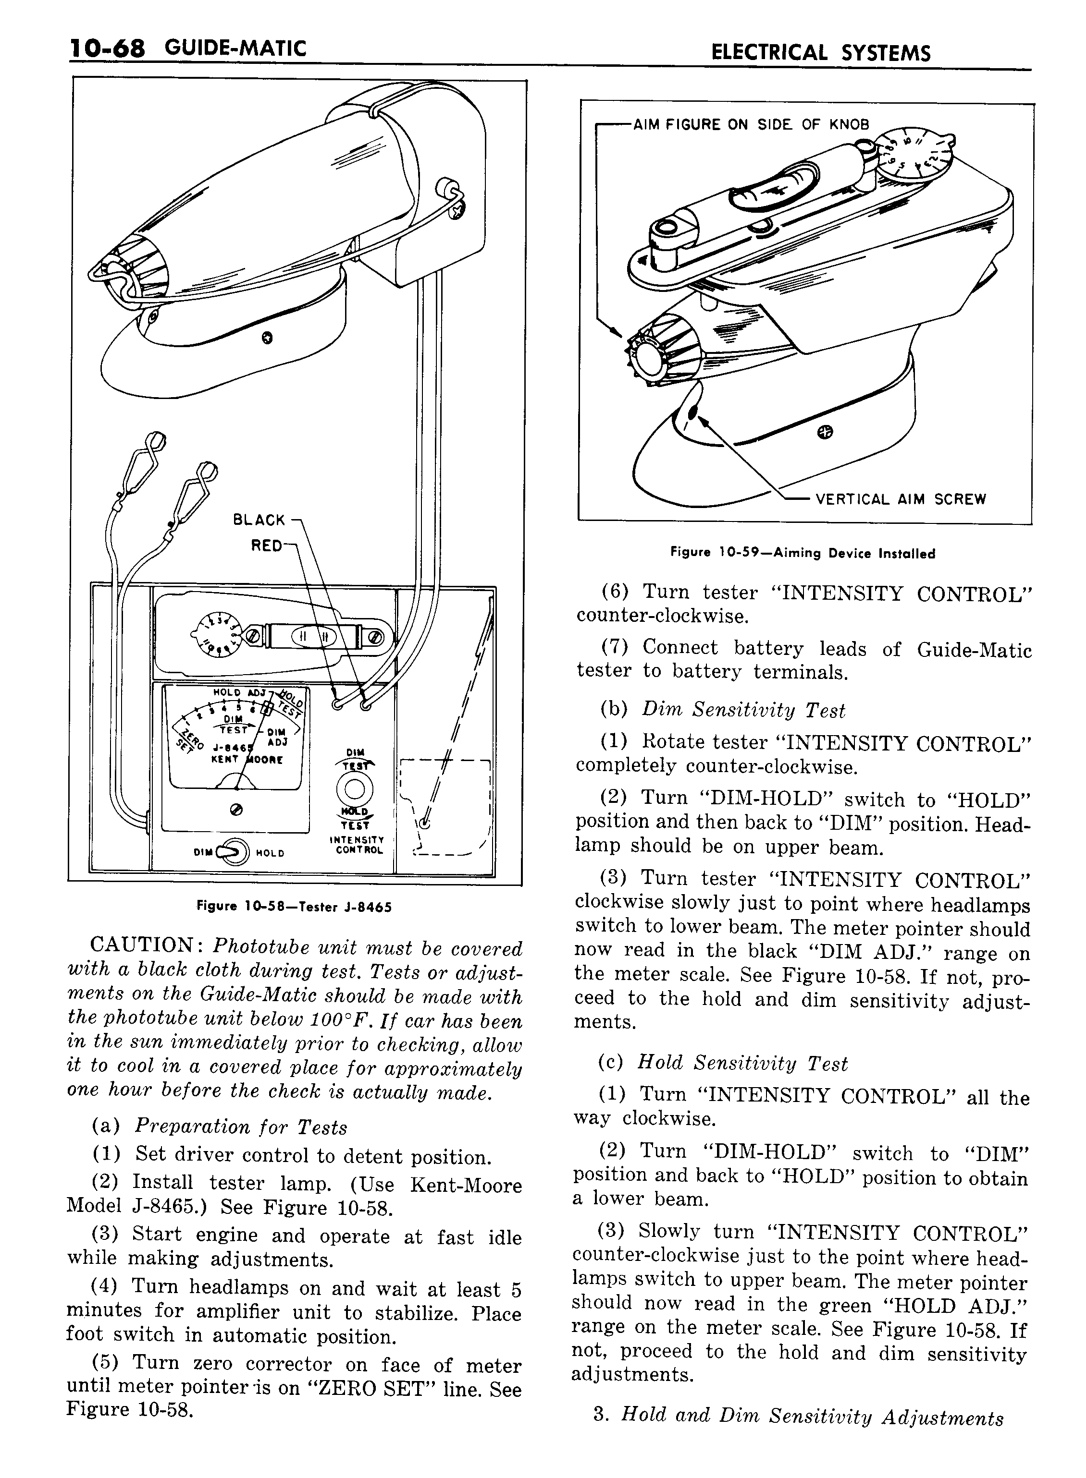 n_11 1960 Buick Shop Manual - Electrical Systems-068-068.jpg